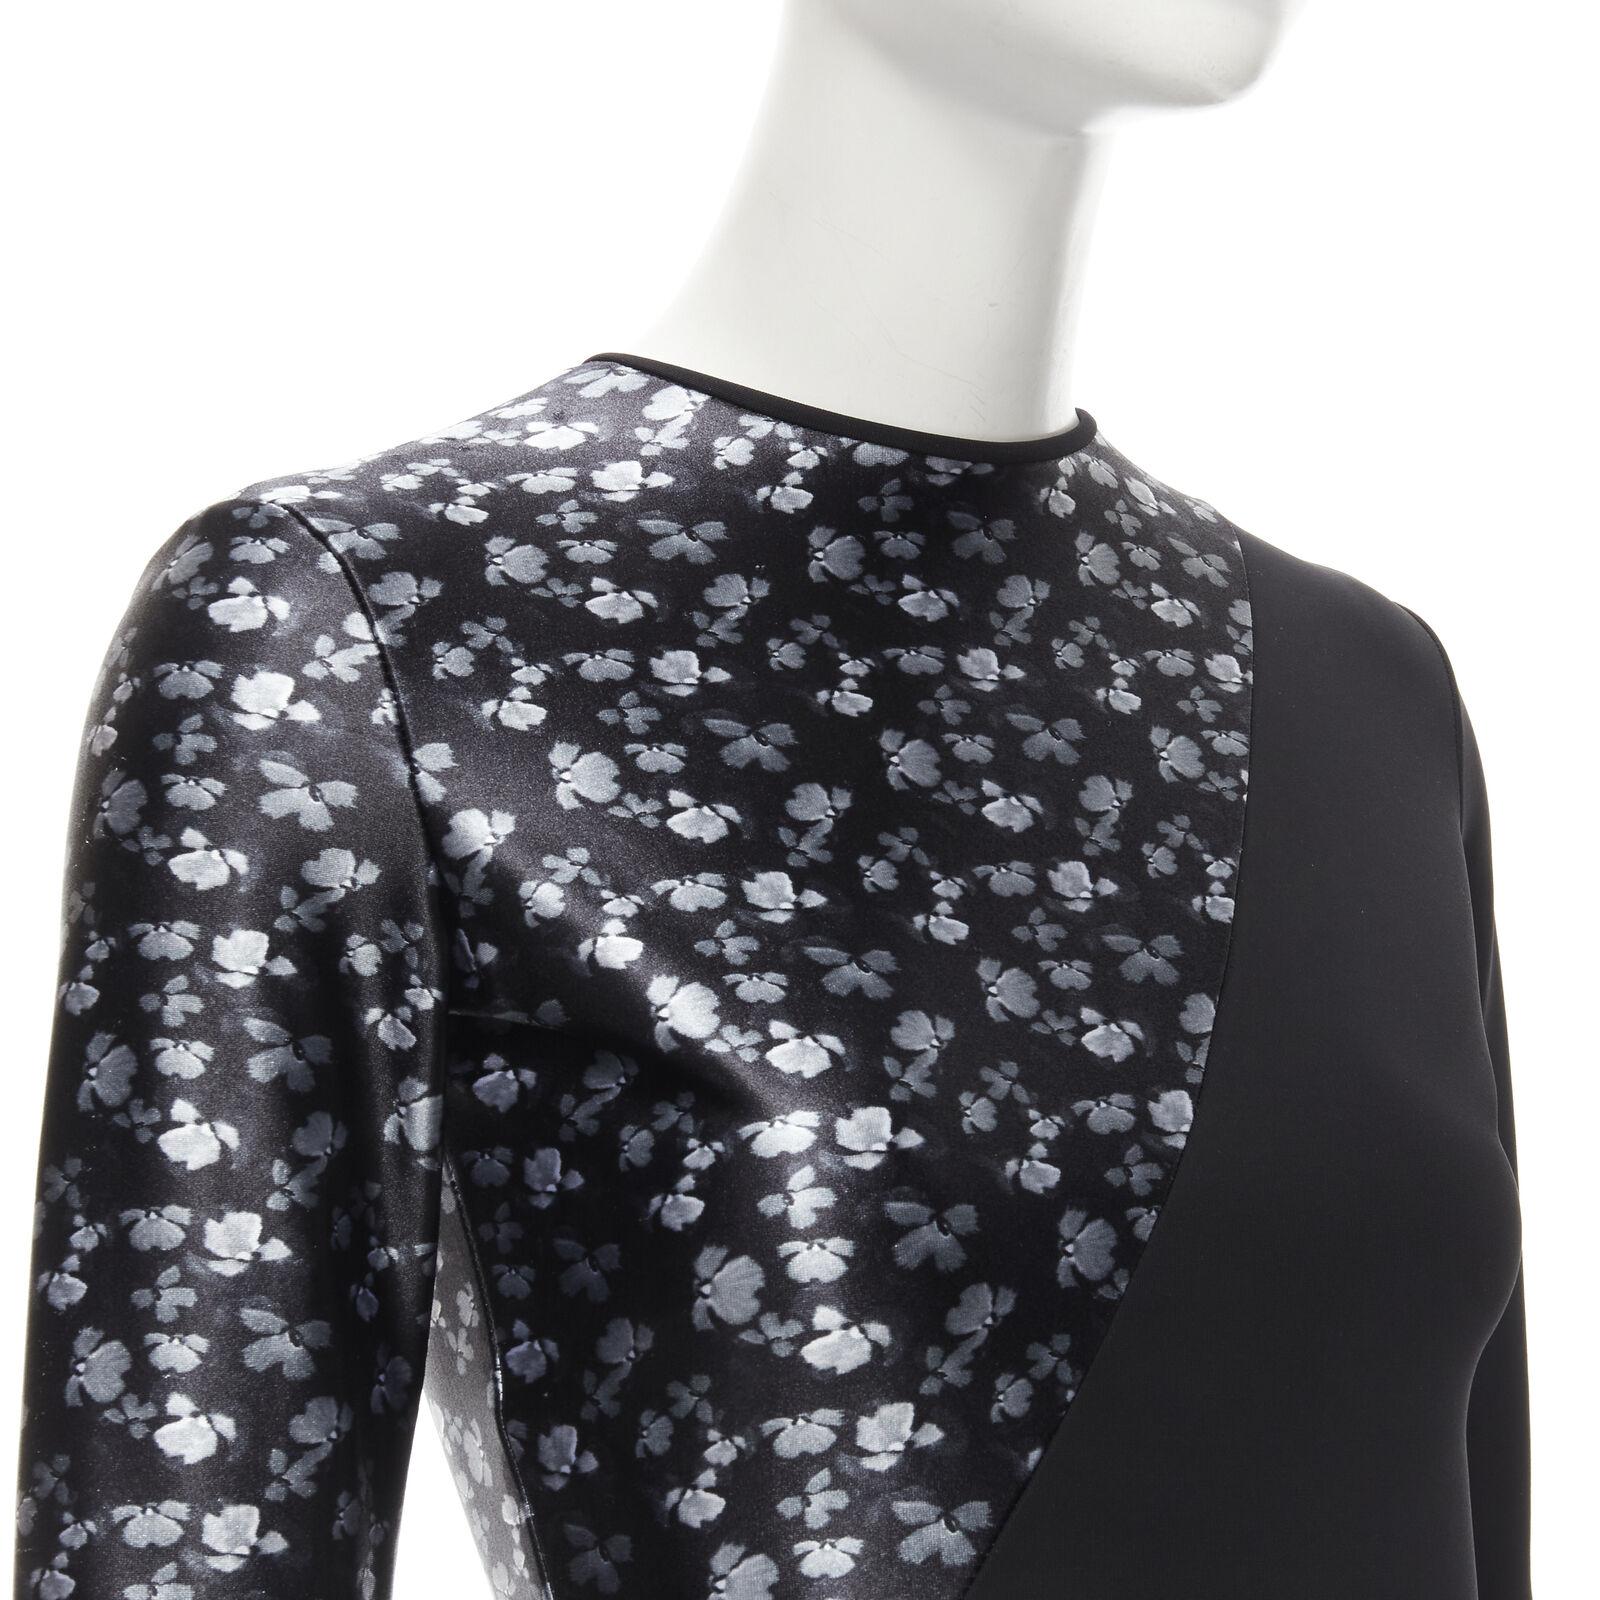 DAVID KOMA black butterfly floral print twist seam mini dress UK6 XS
Reference: AAWC/A00051
Brand: David Koma
Color: Black, Grey
Pattern: Floral
Closure: Zip
Made in: United Kingdom

CONDITION:
Condition: Excellent, this item was pre-owned and is in